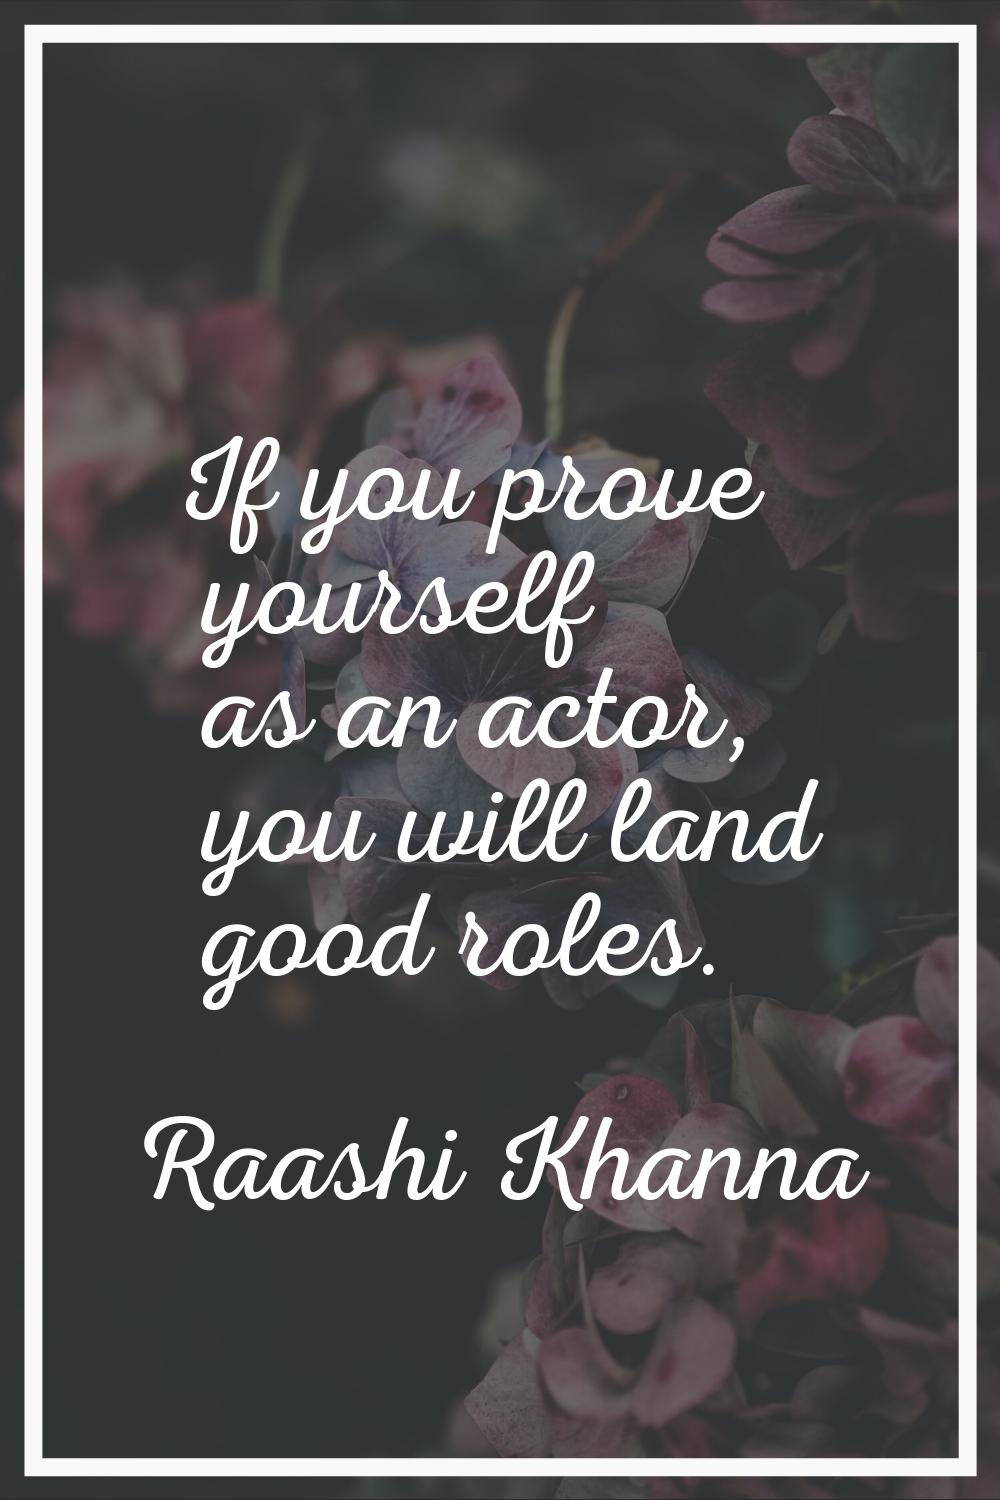 If you prove yourself as an actor, you will land good roles.